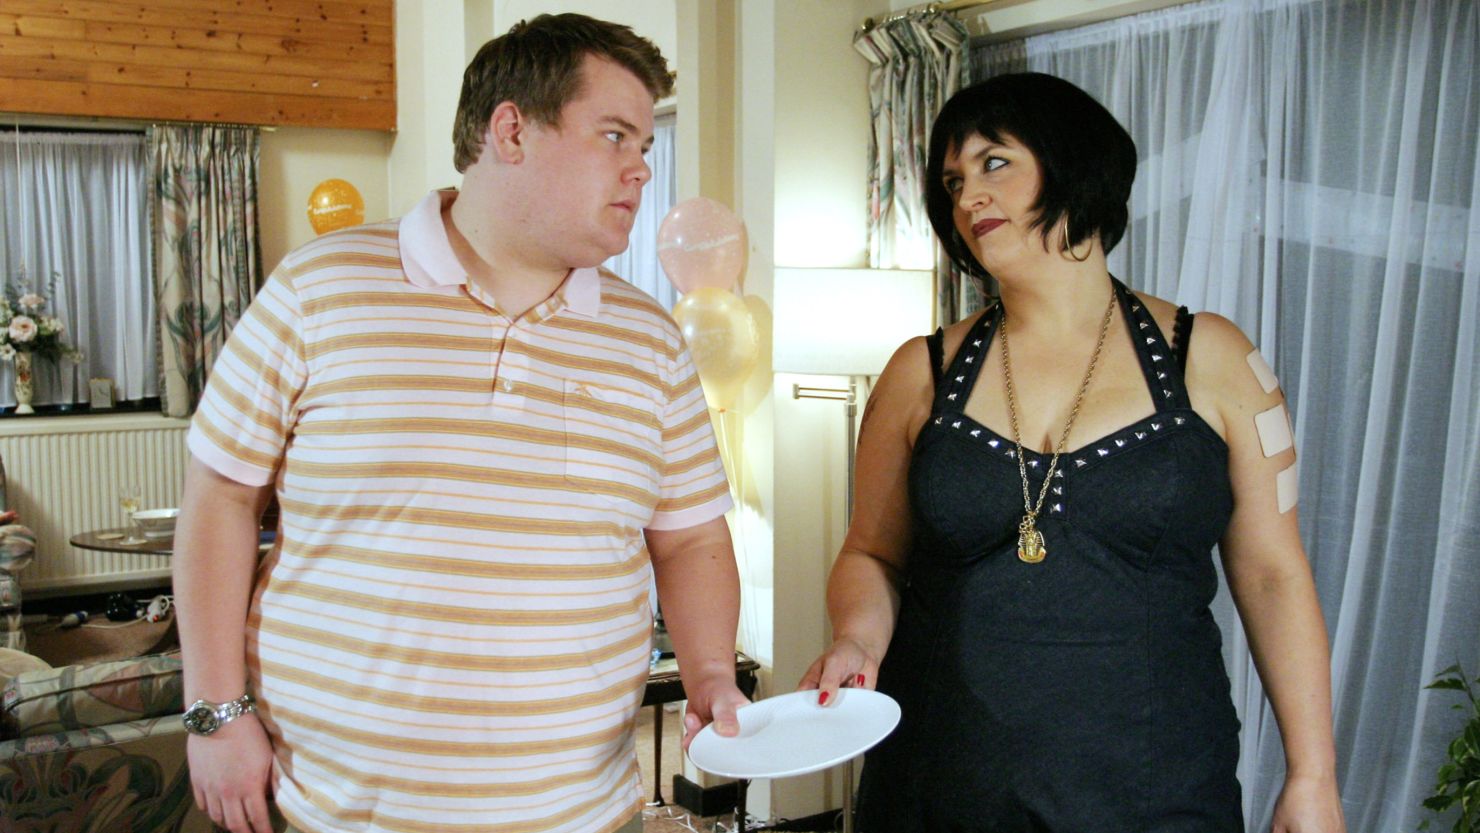 Gavin and Stacey's co-writers James Corden and Ruth Jones have announced that the show's final episode will air this Christmas.